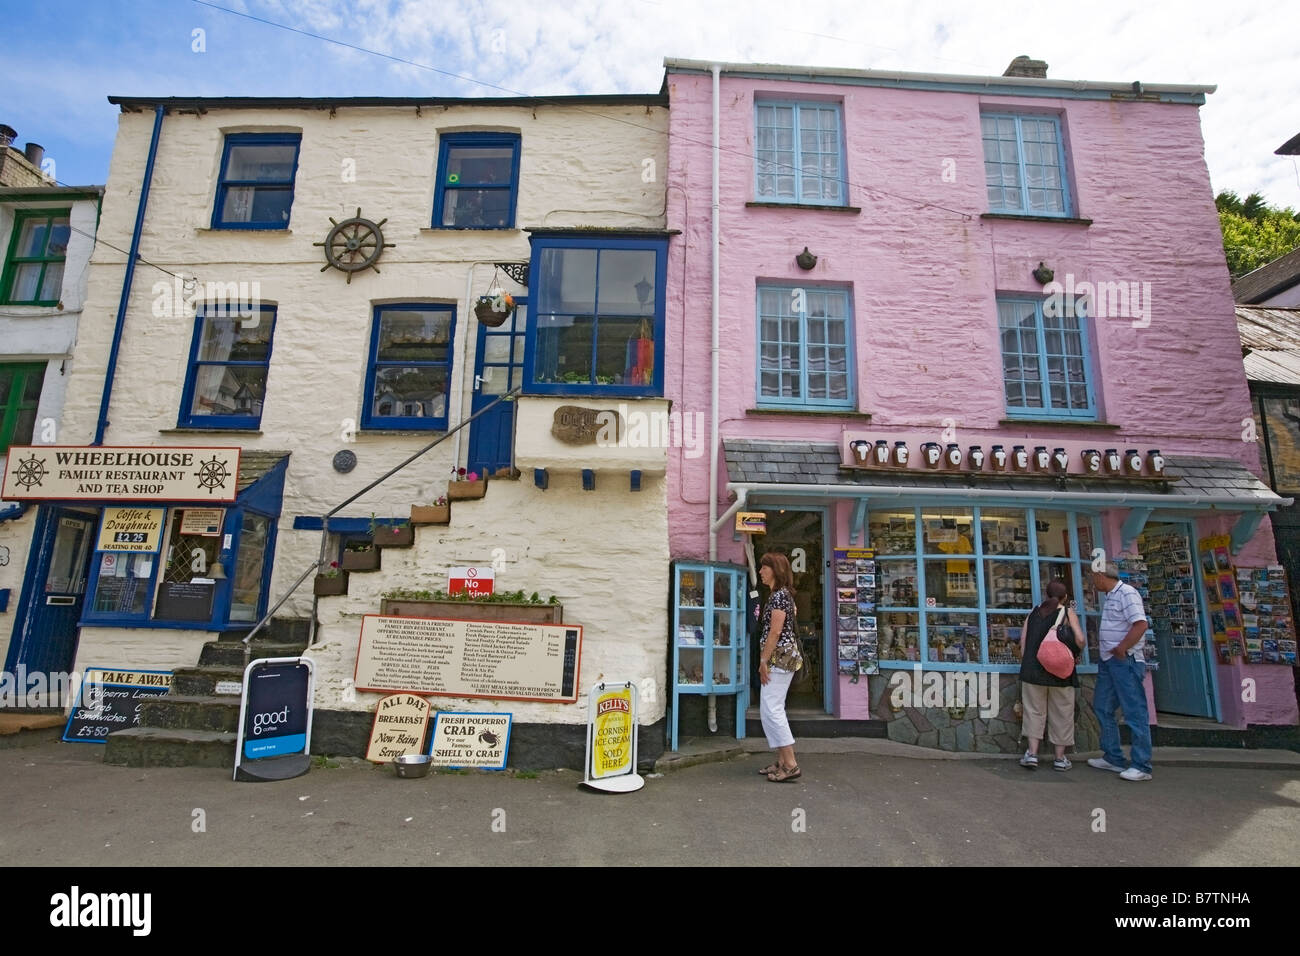 Wheelhouse family restaurant and tea shop next to pottery shop, local businesses in Polperro, Cornwall, UK Stock Photo